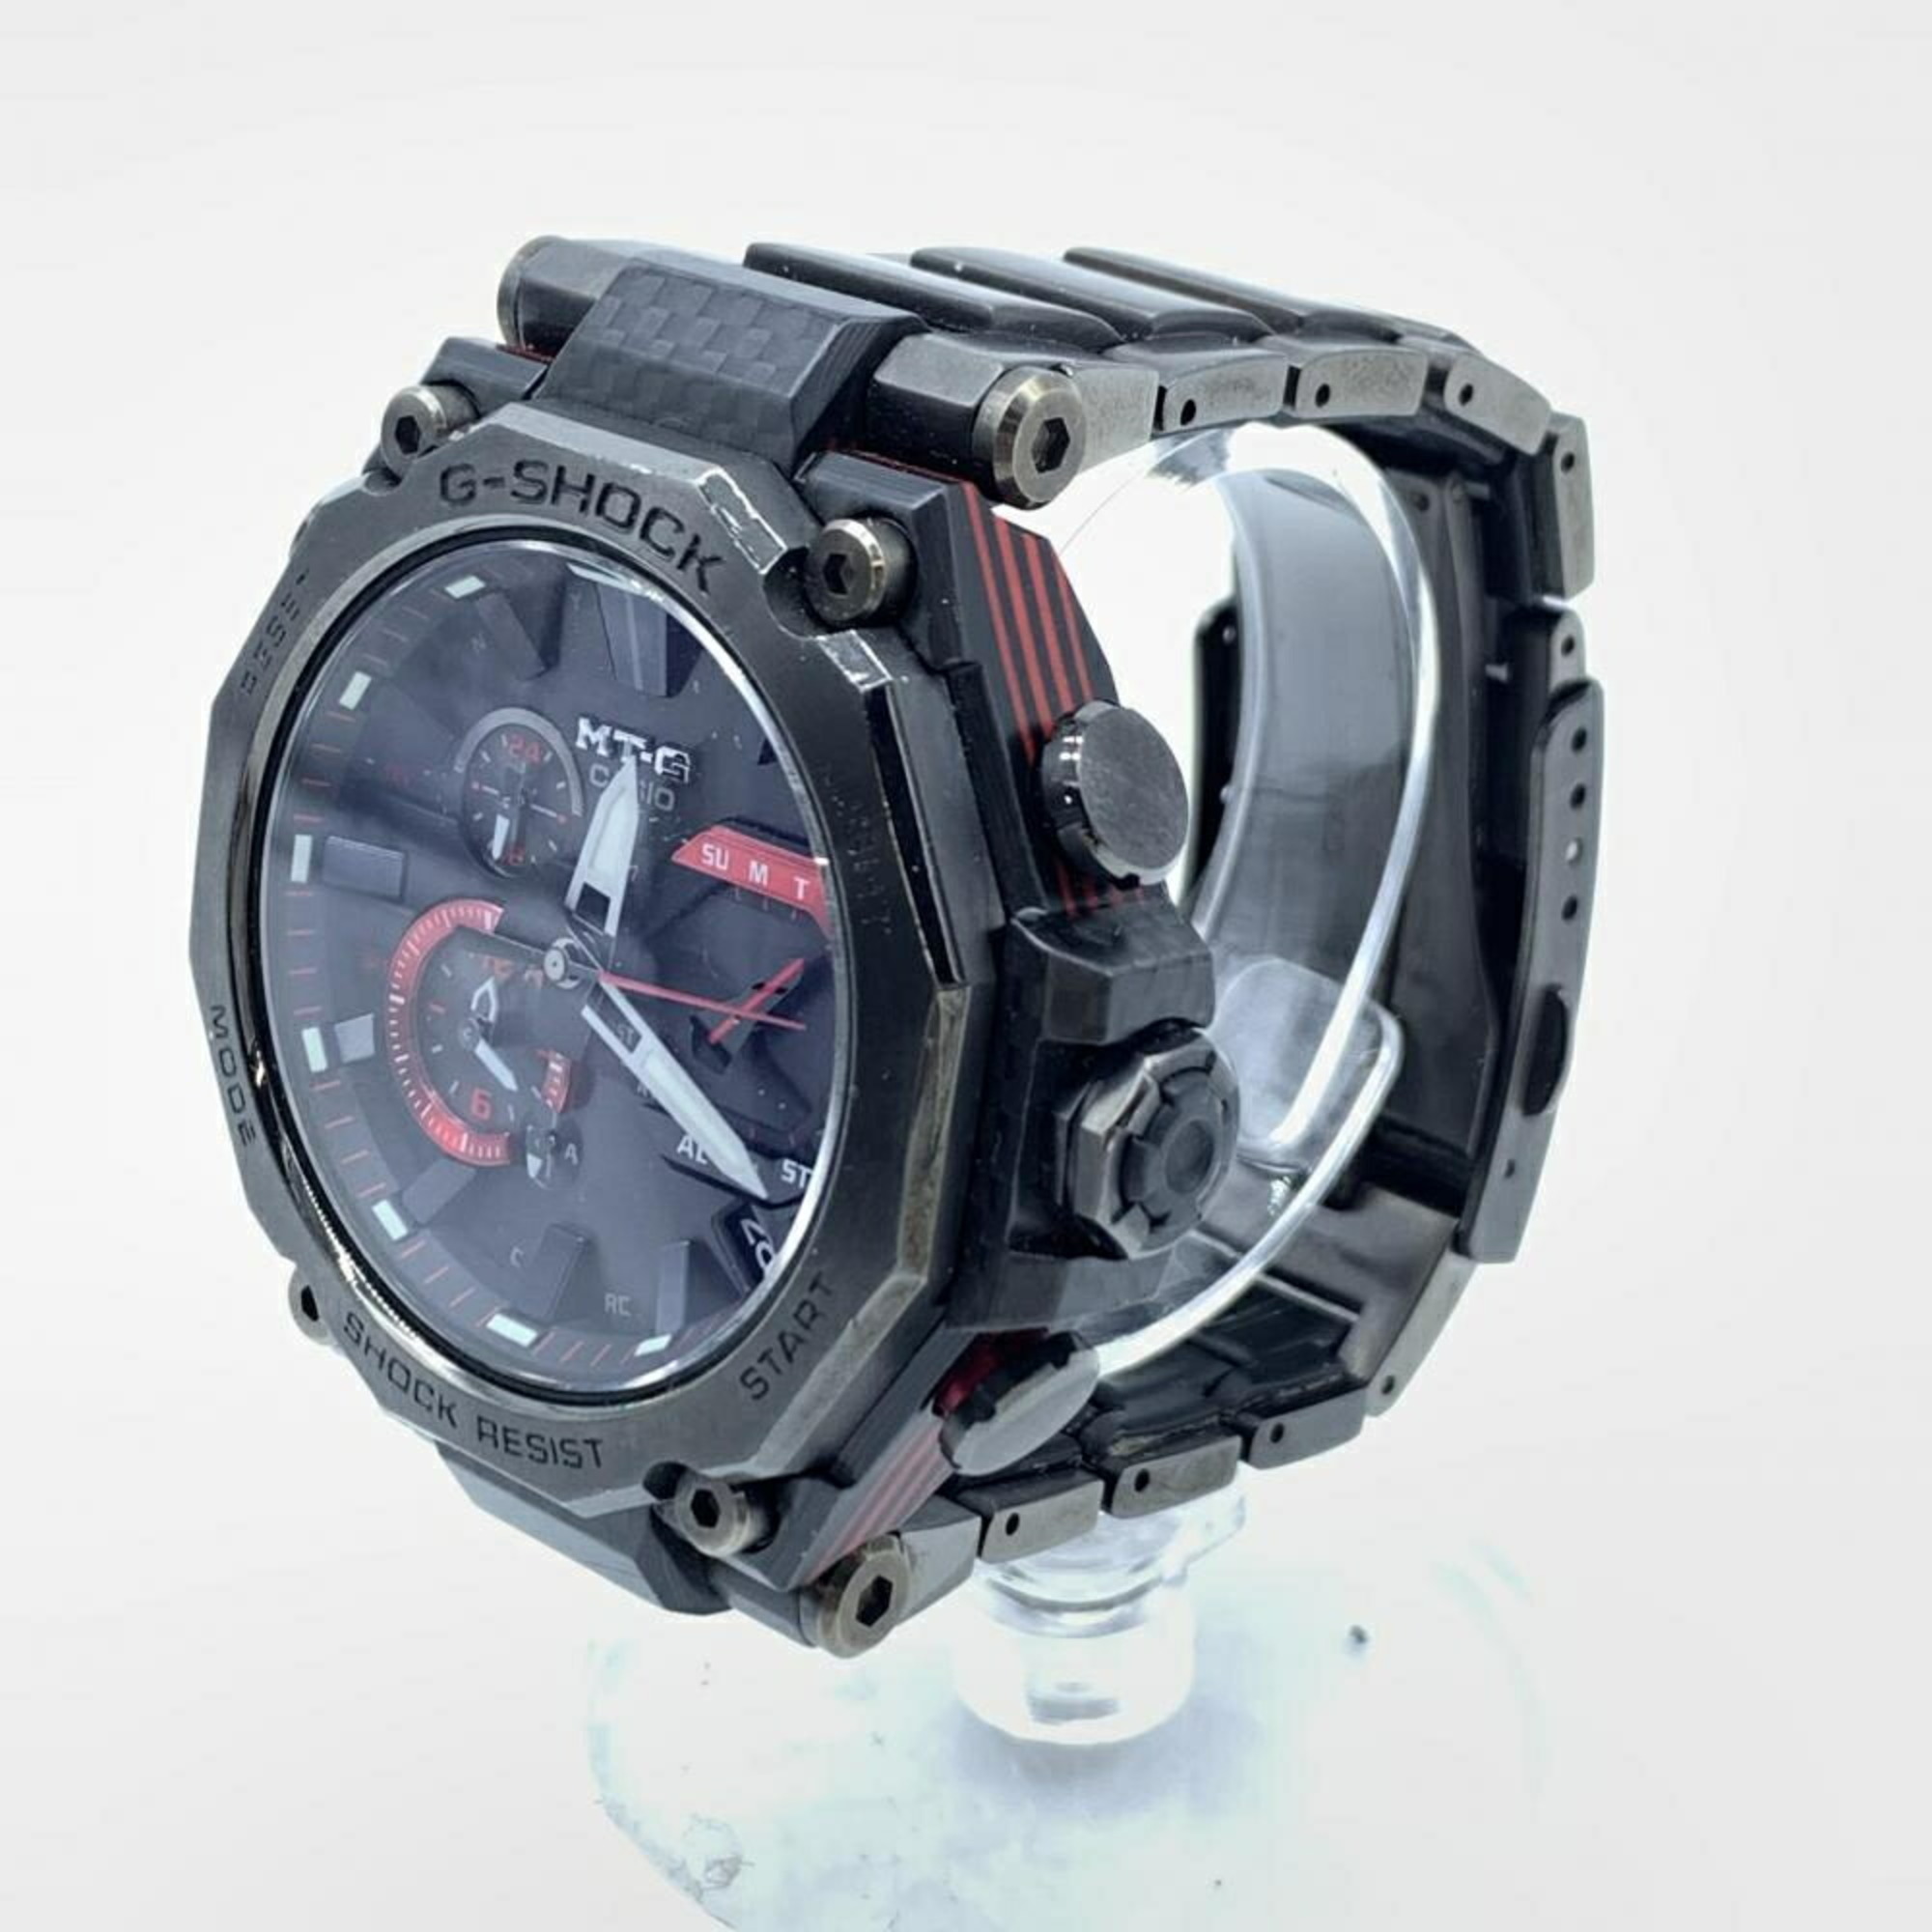 CASIO G-SHOCK Watch MTG-B2000D-1AJF Equipped with BLUETOOTH Radio